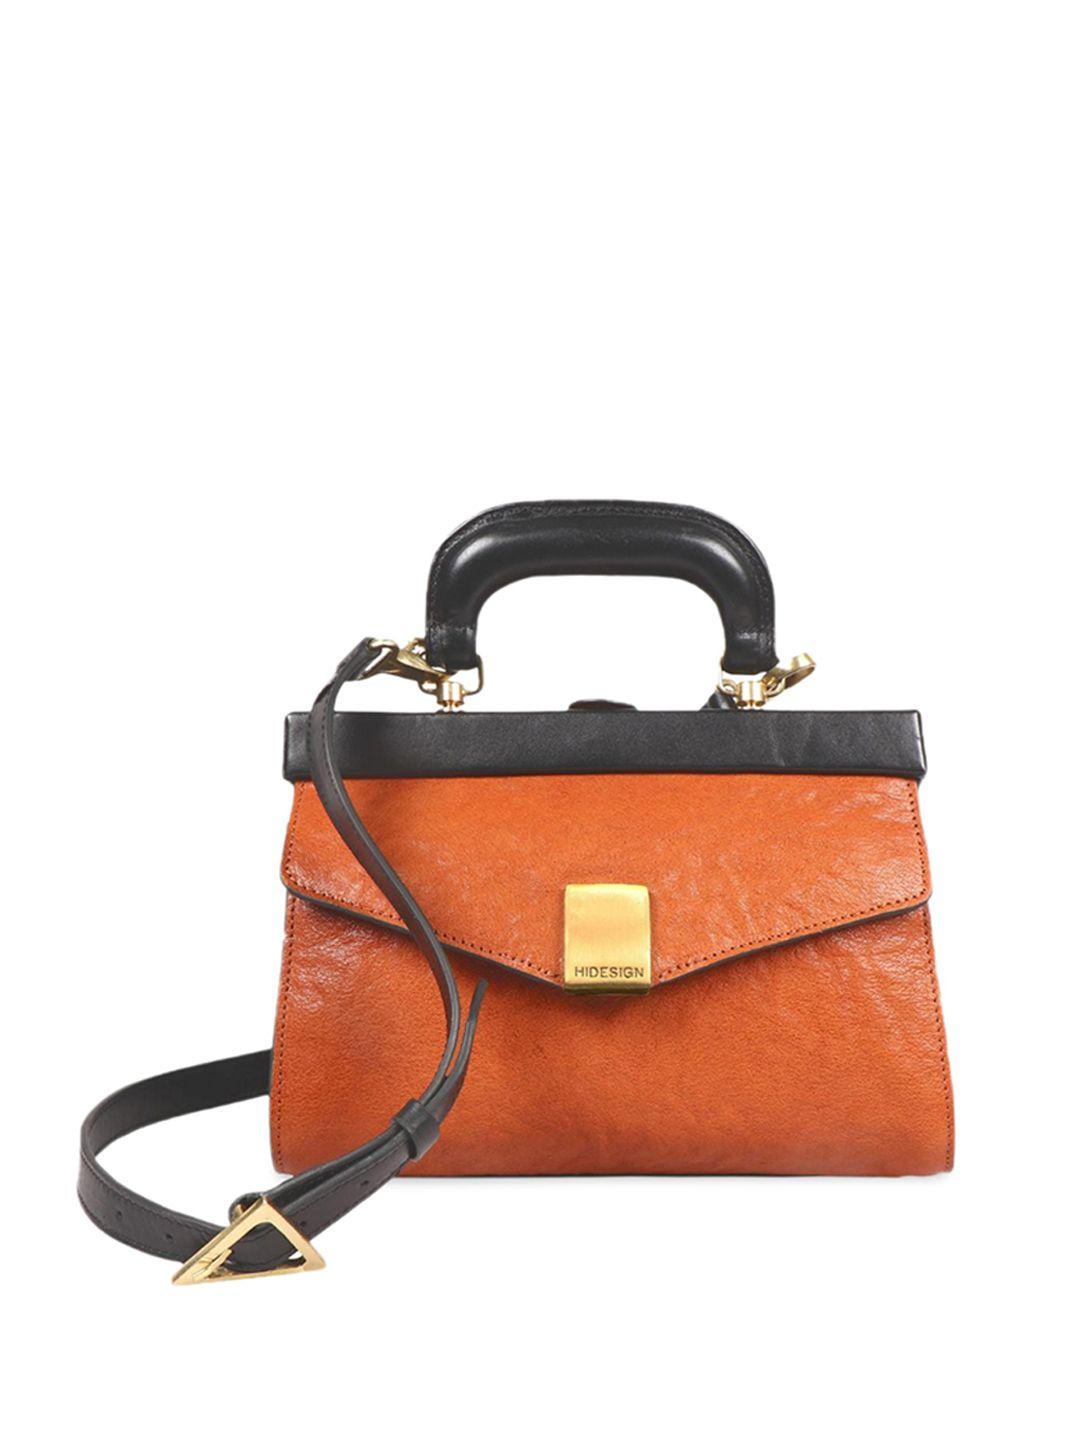 hidesign leather textured structured handheld bag